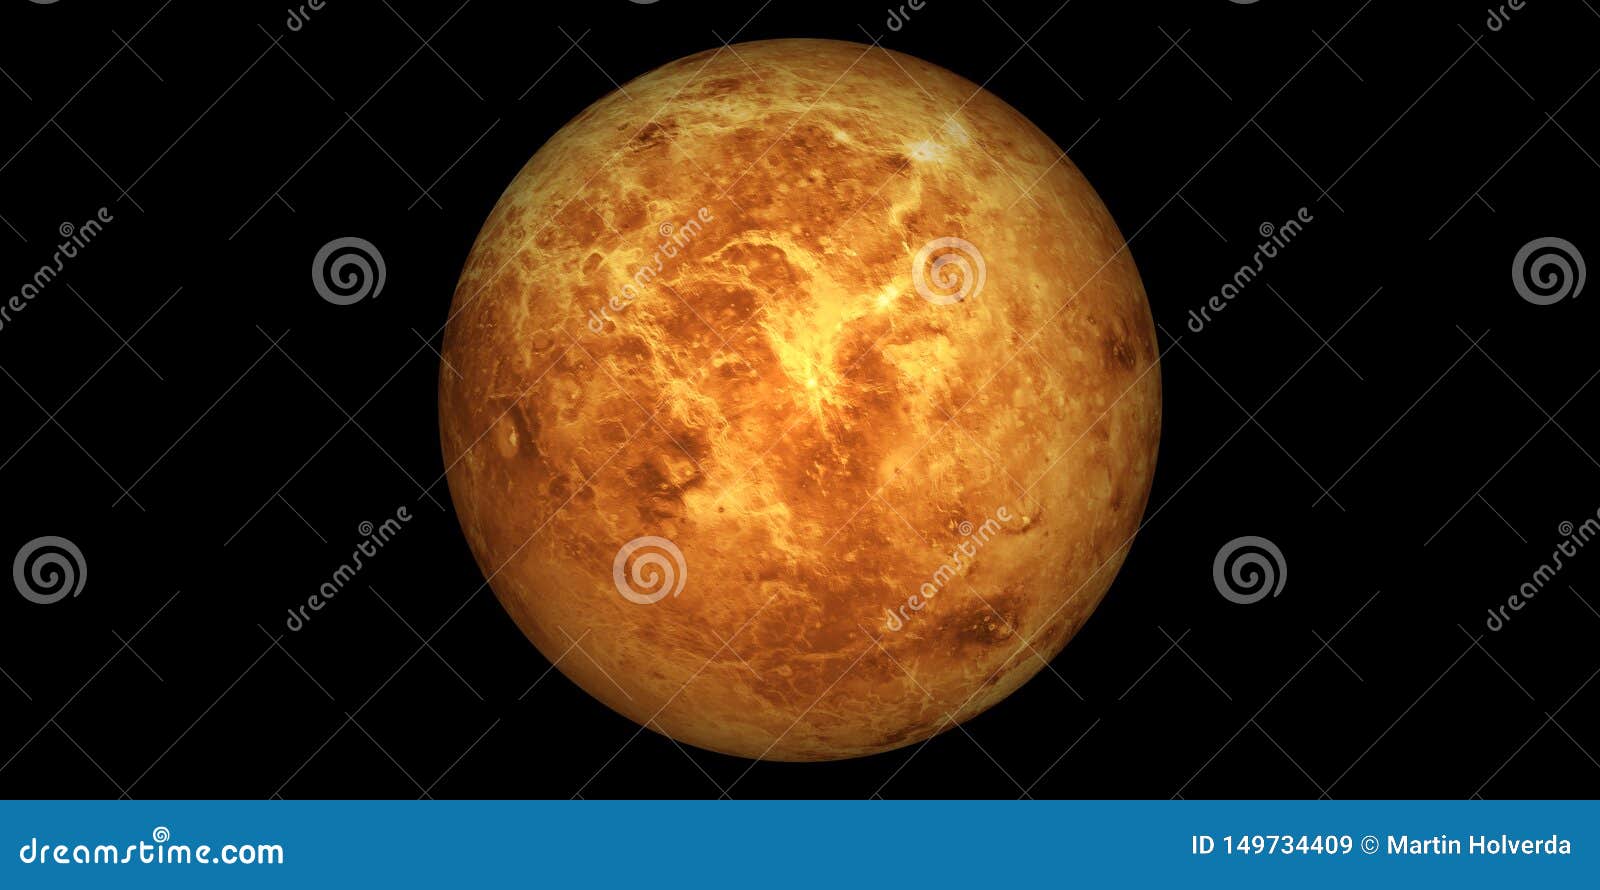 venus planet from space round black background